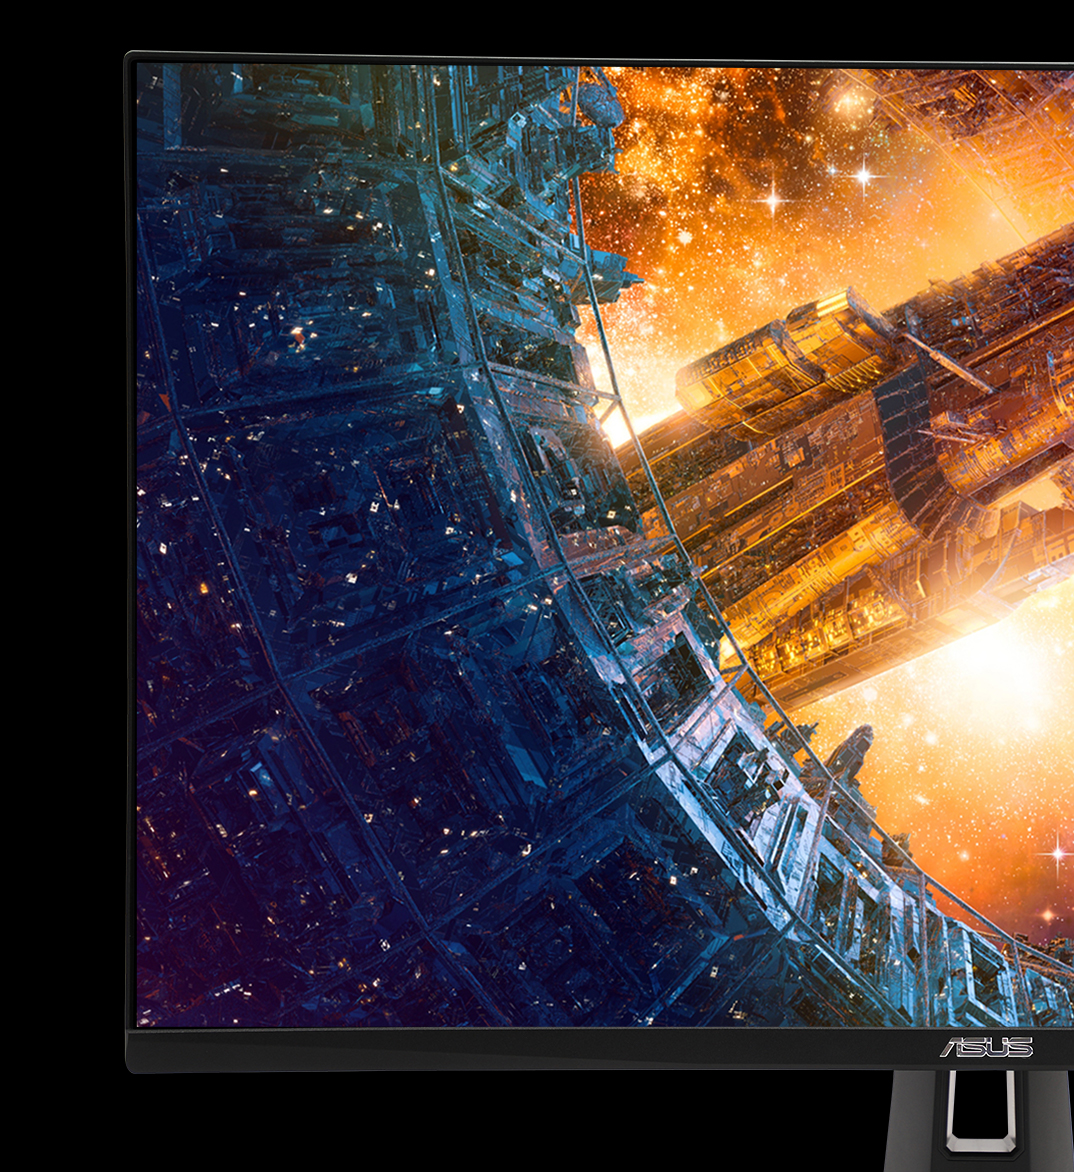 TUF Gaming VG27AQM1A takes advantage of HDR technology